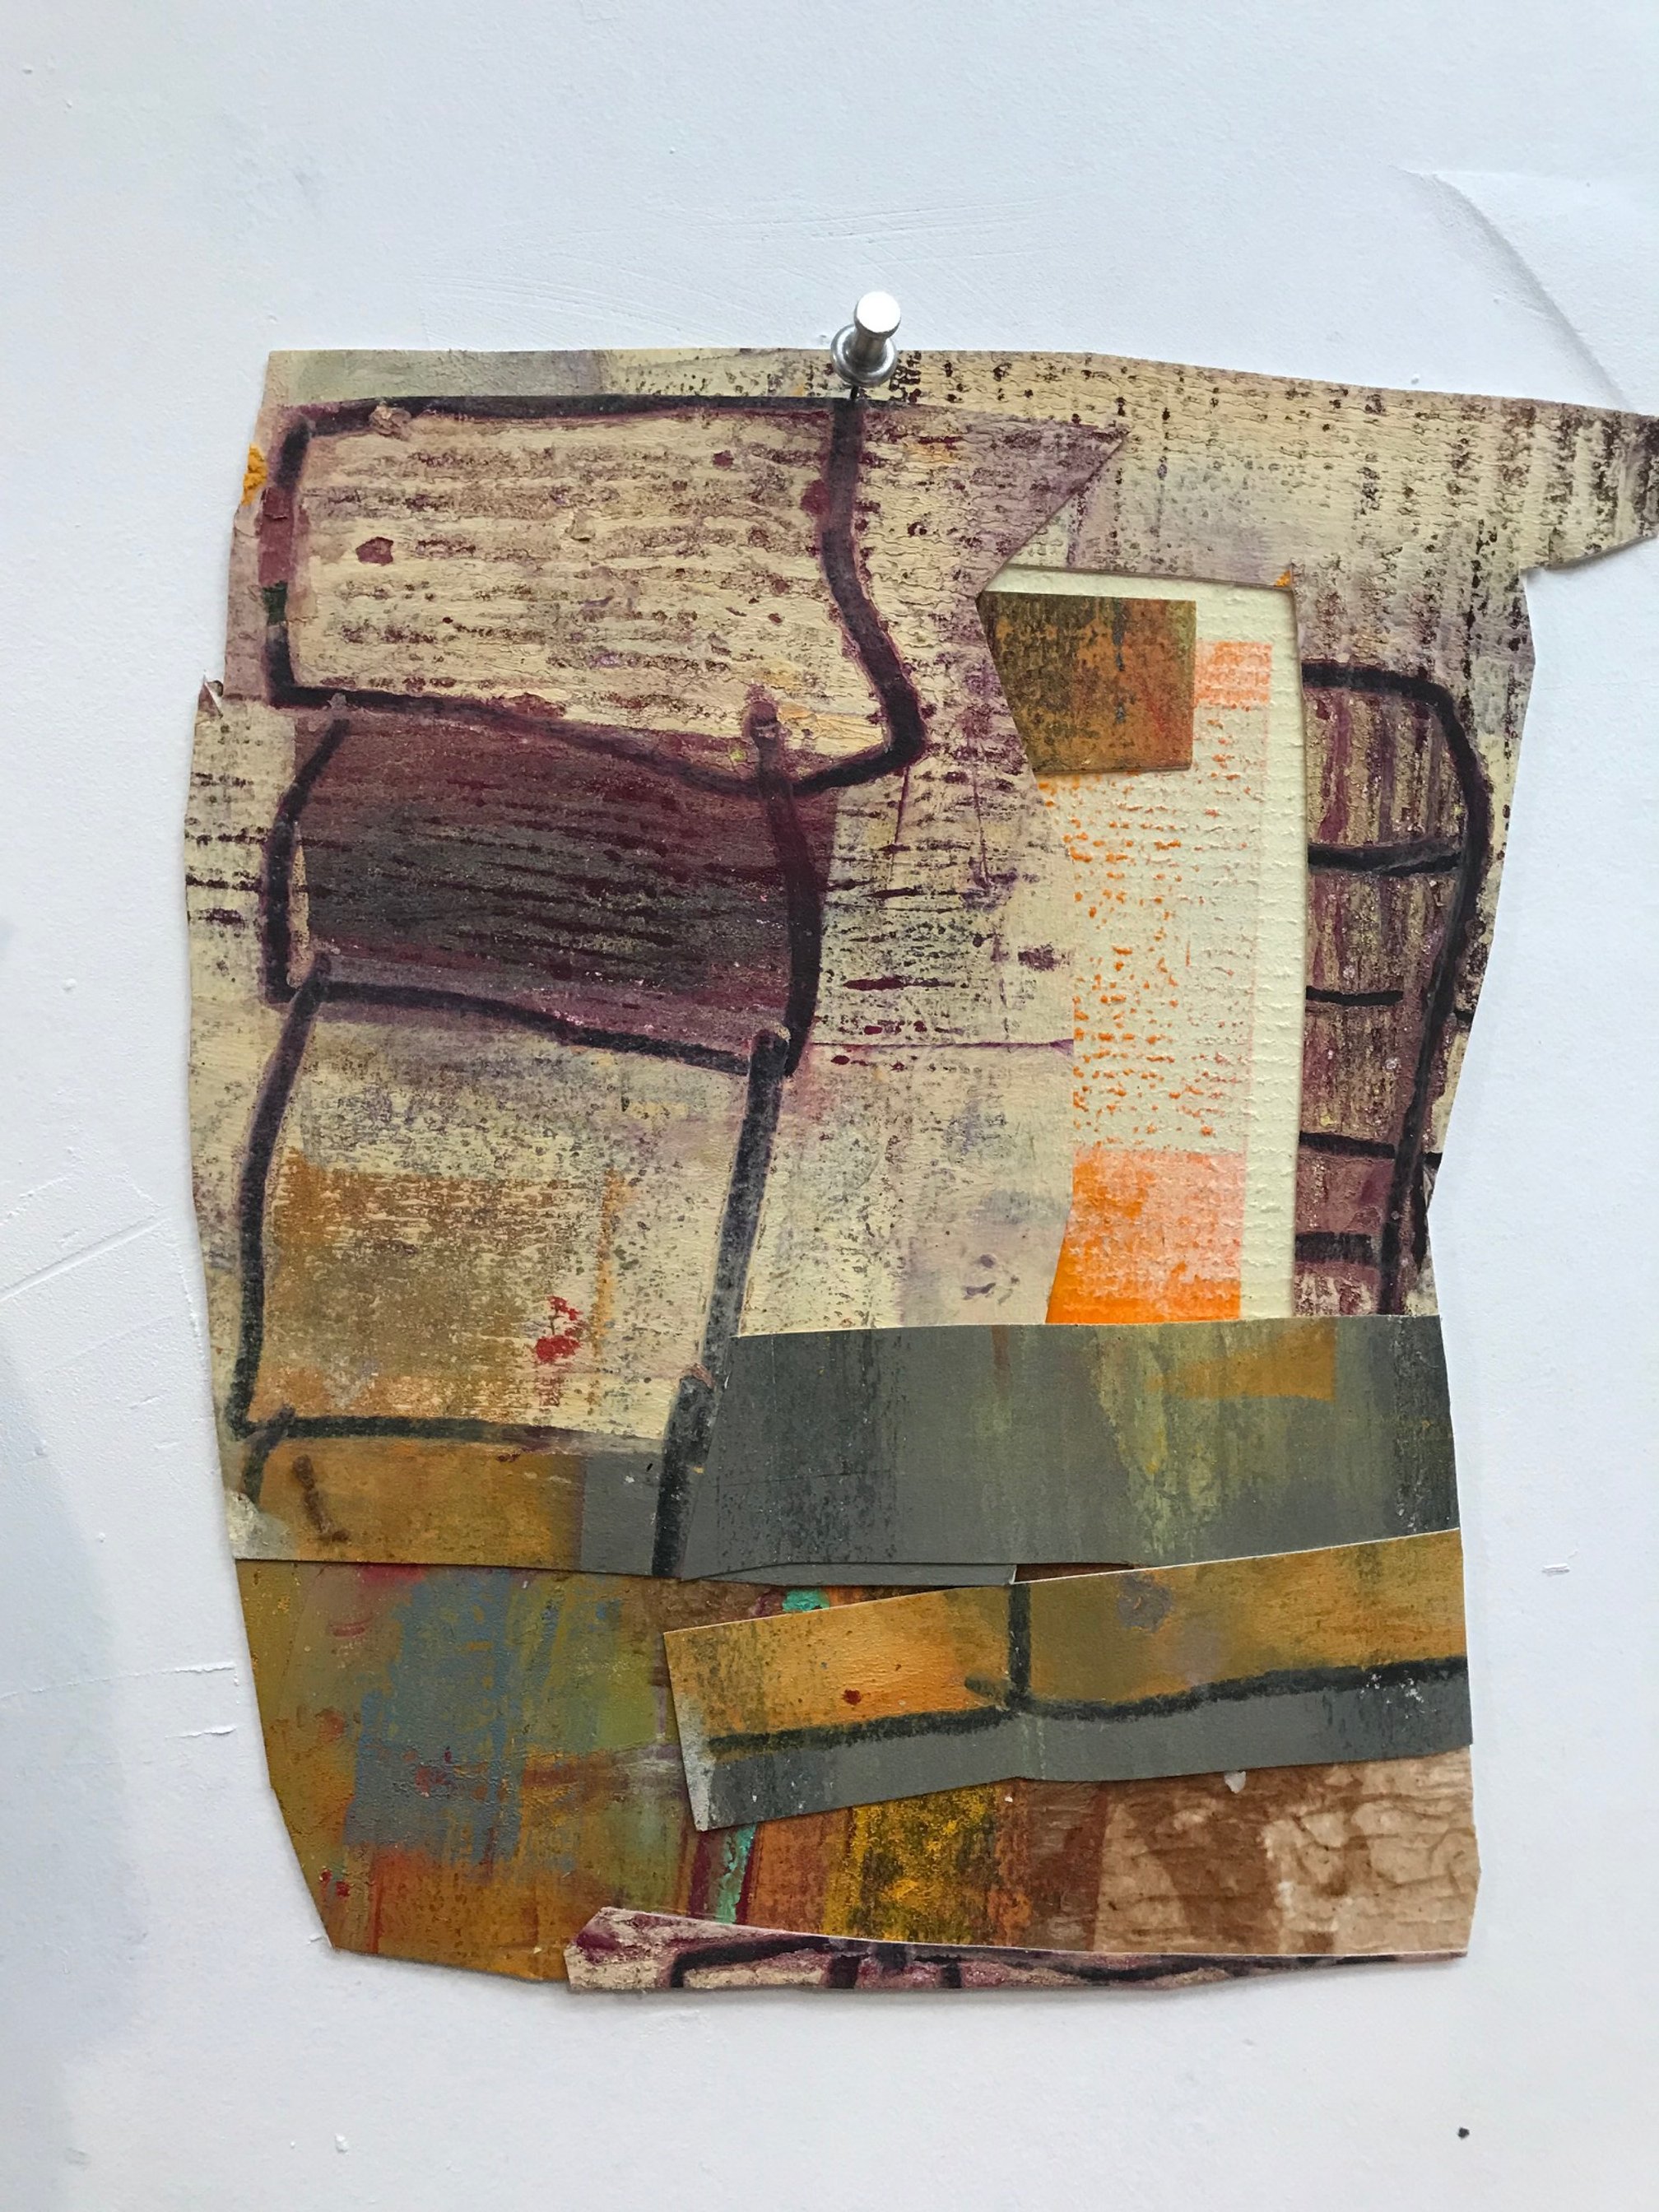 Experimental Printmaking with Collage - The Contemporary Austin